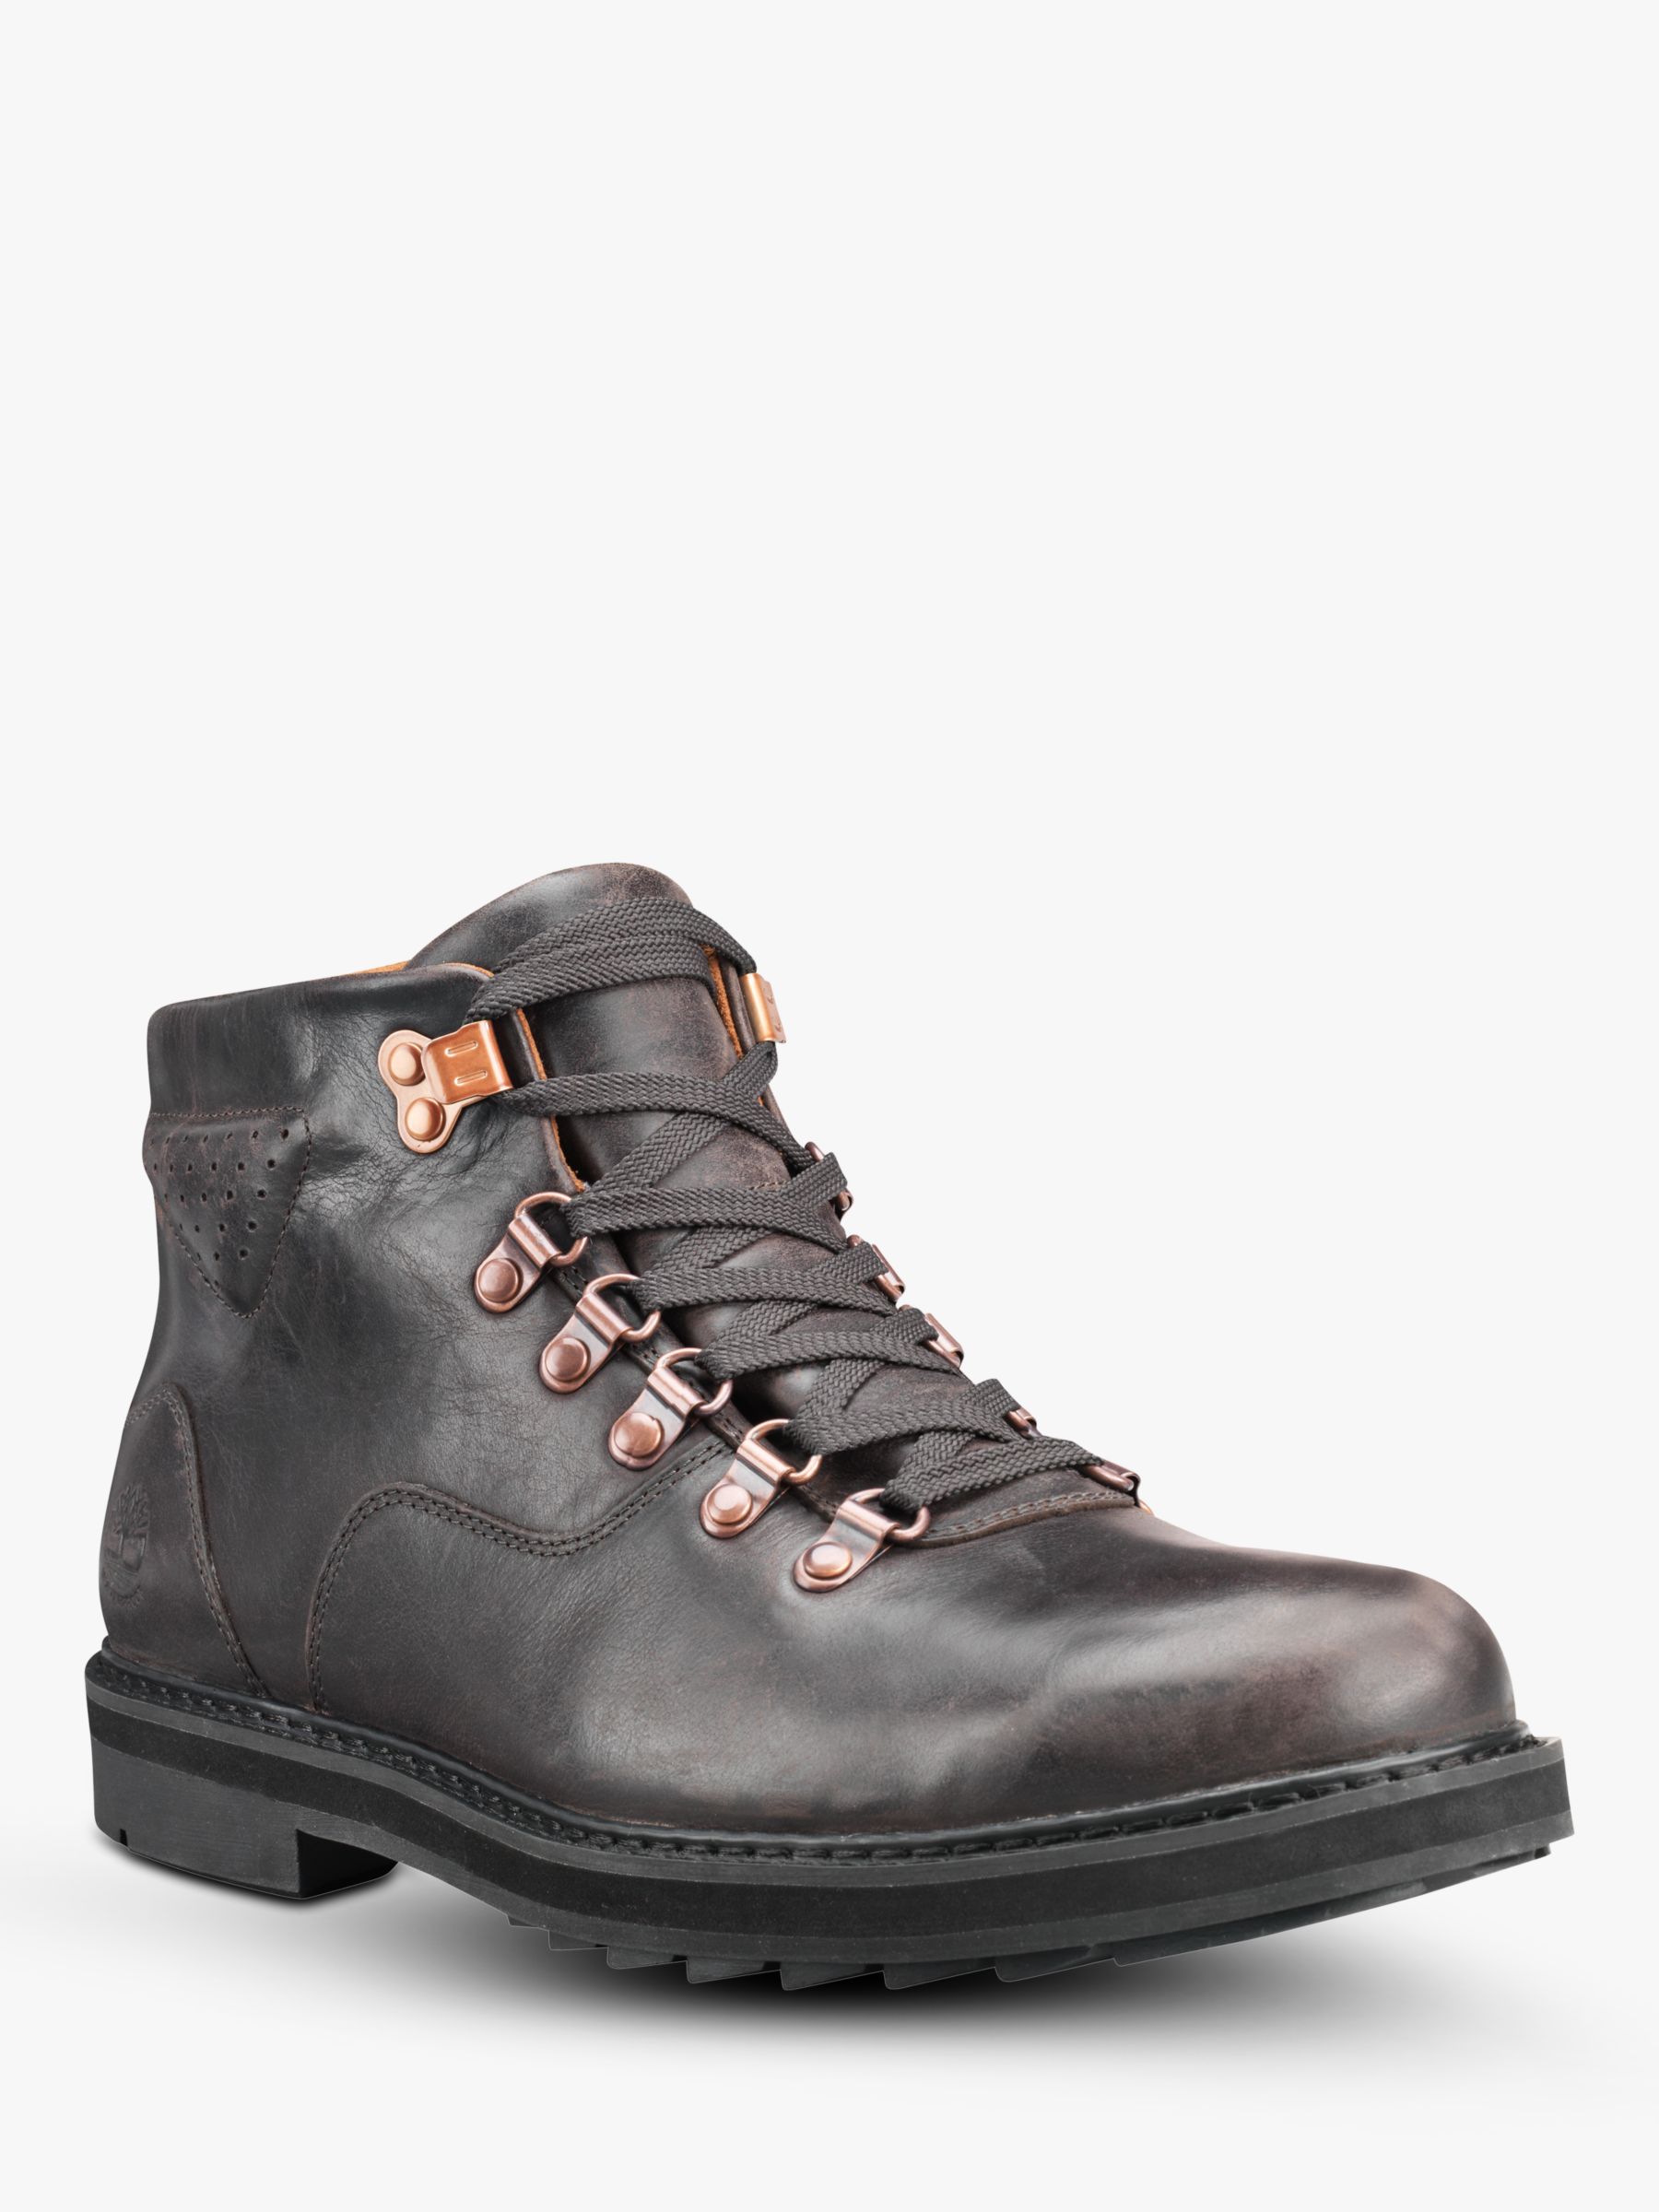 men's squall canyon waterproof boots